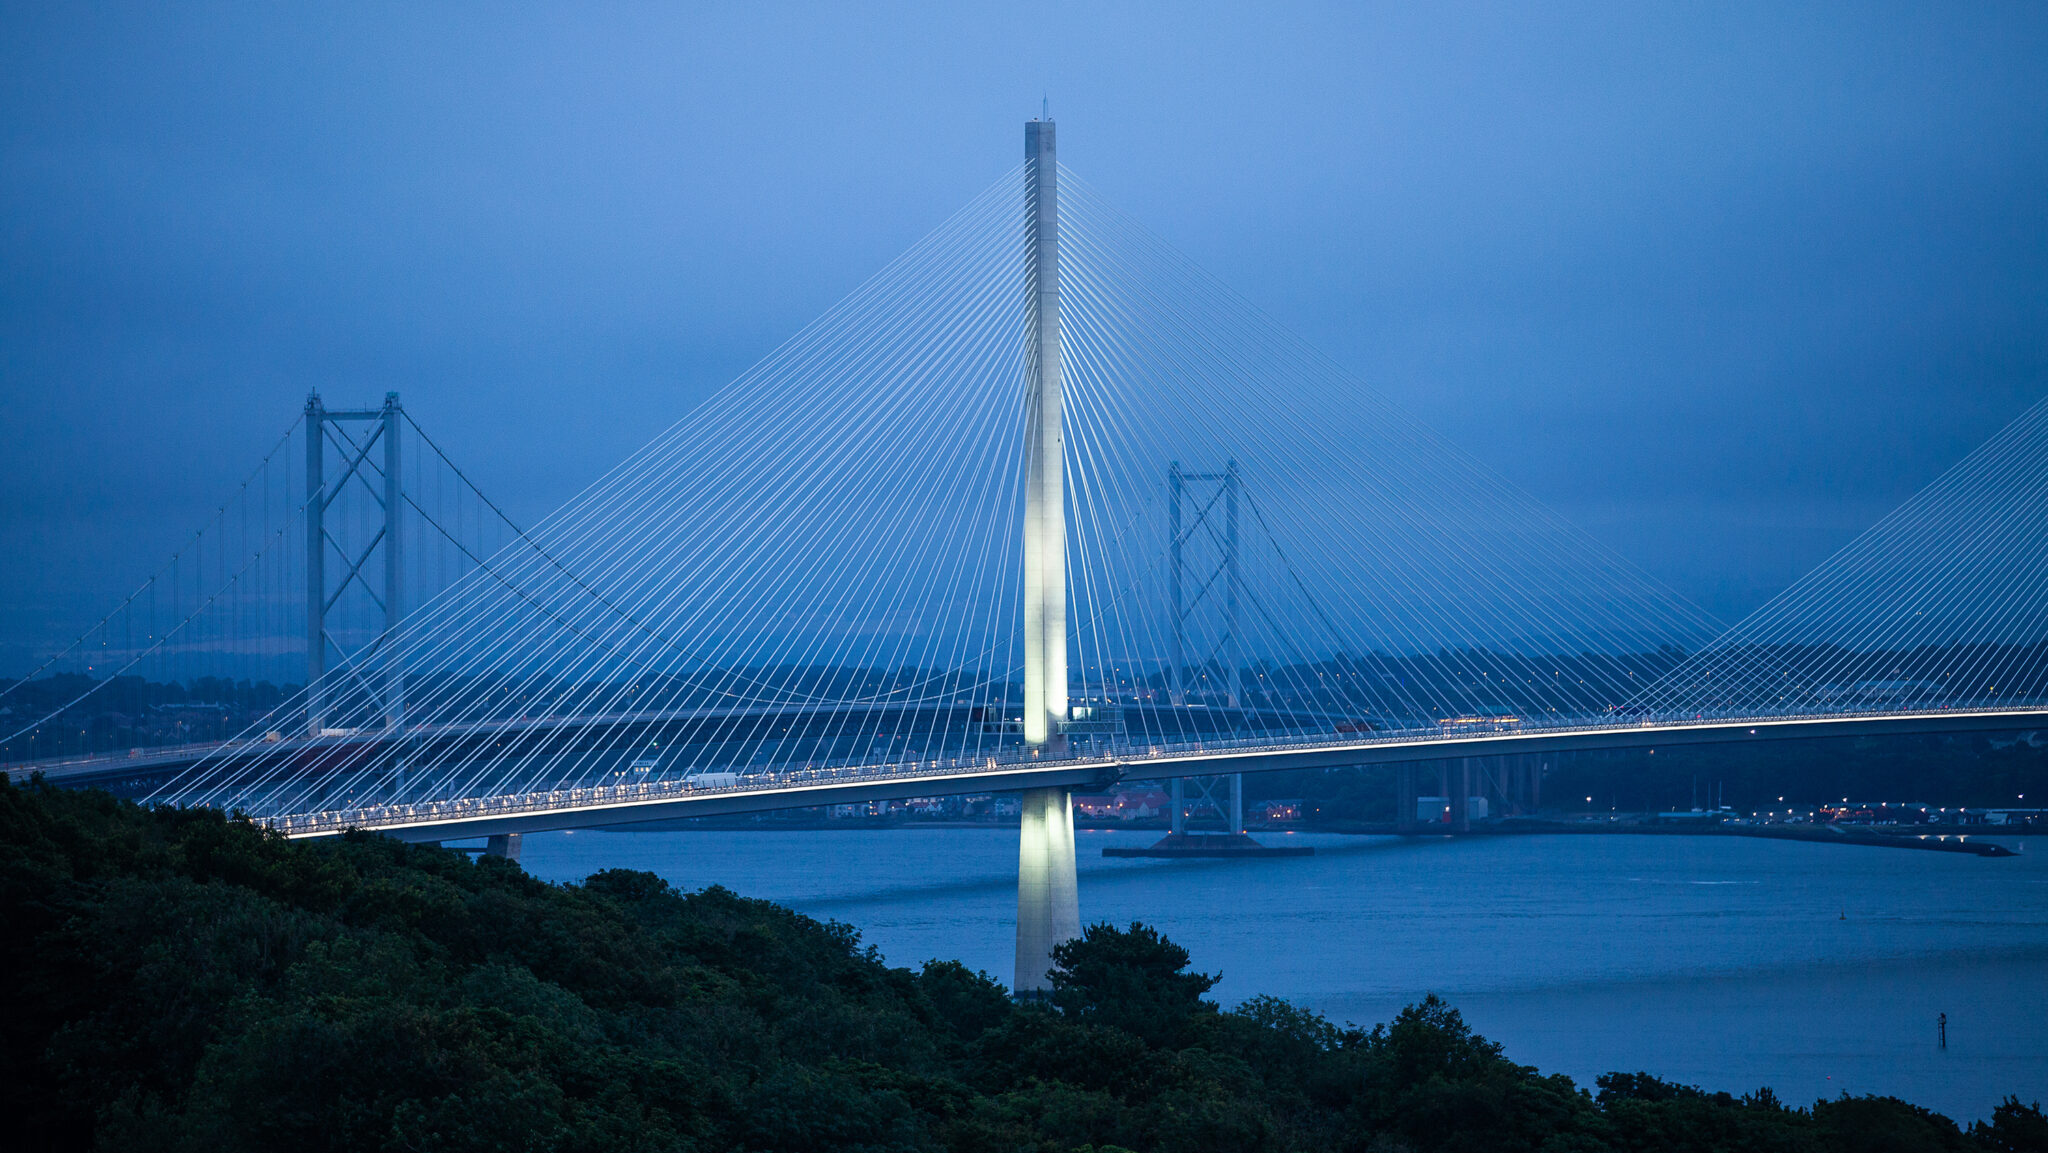 QUEENSFERRY CROSSING ARCHITECTURAL LIGHTING UPGRADE